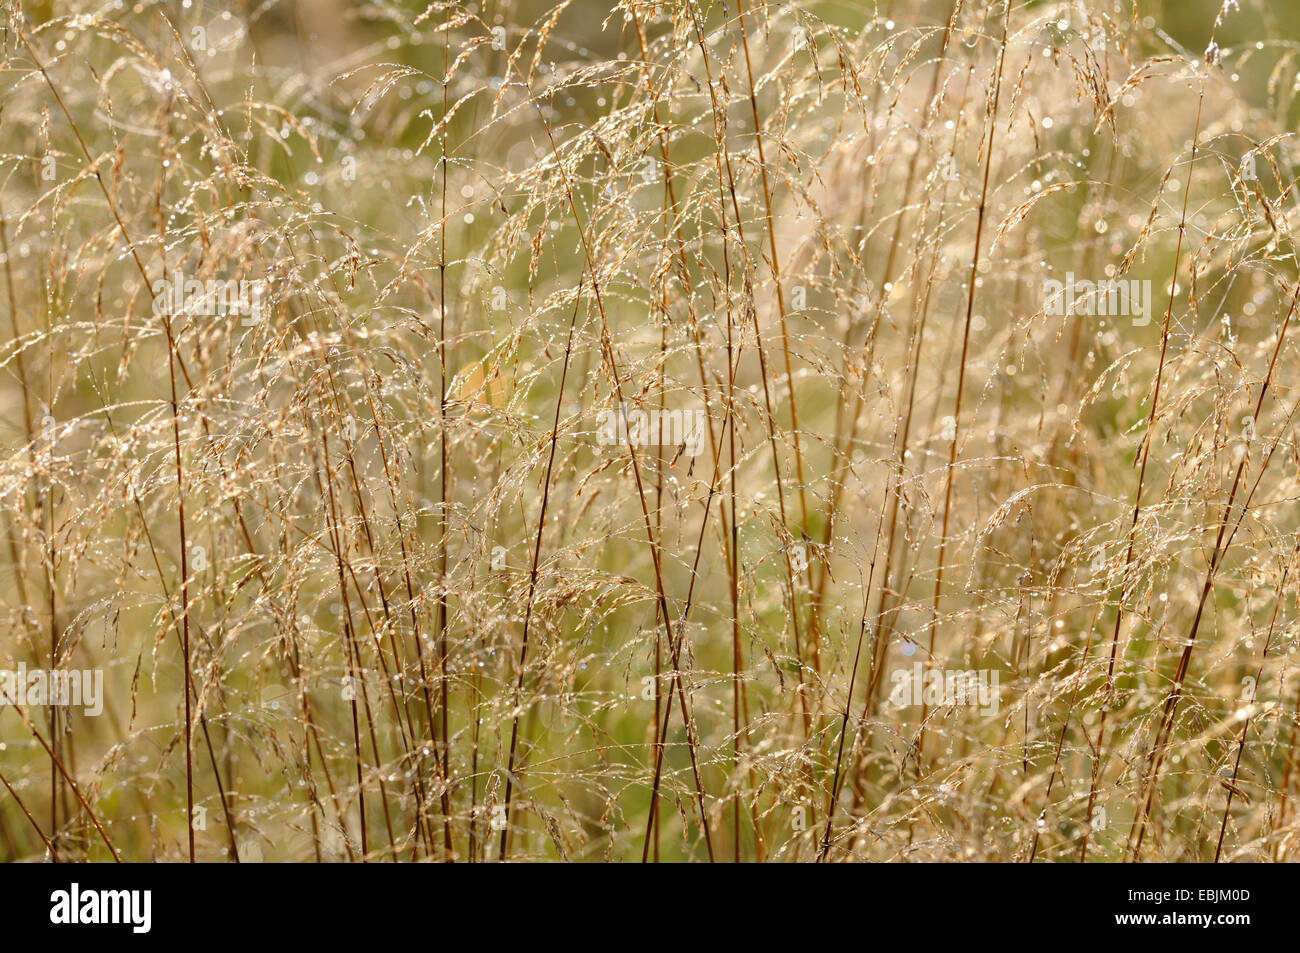 tufted hair-grass (Deschampsia cespitosa), with morning dew, Germany Stock Photo